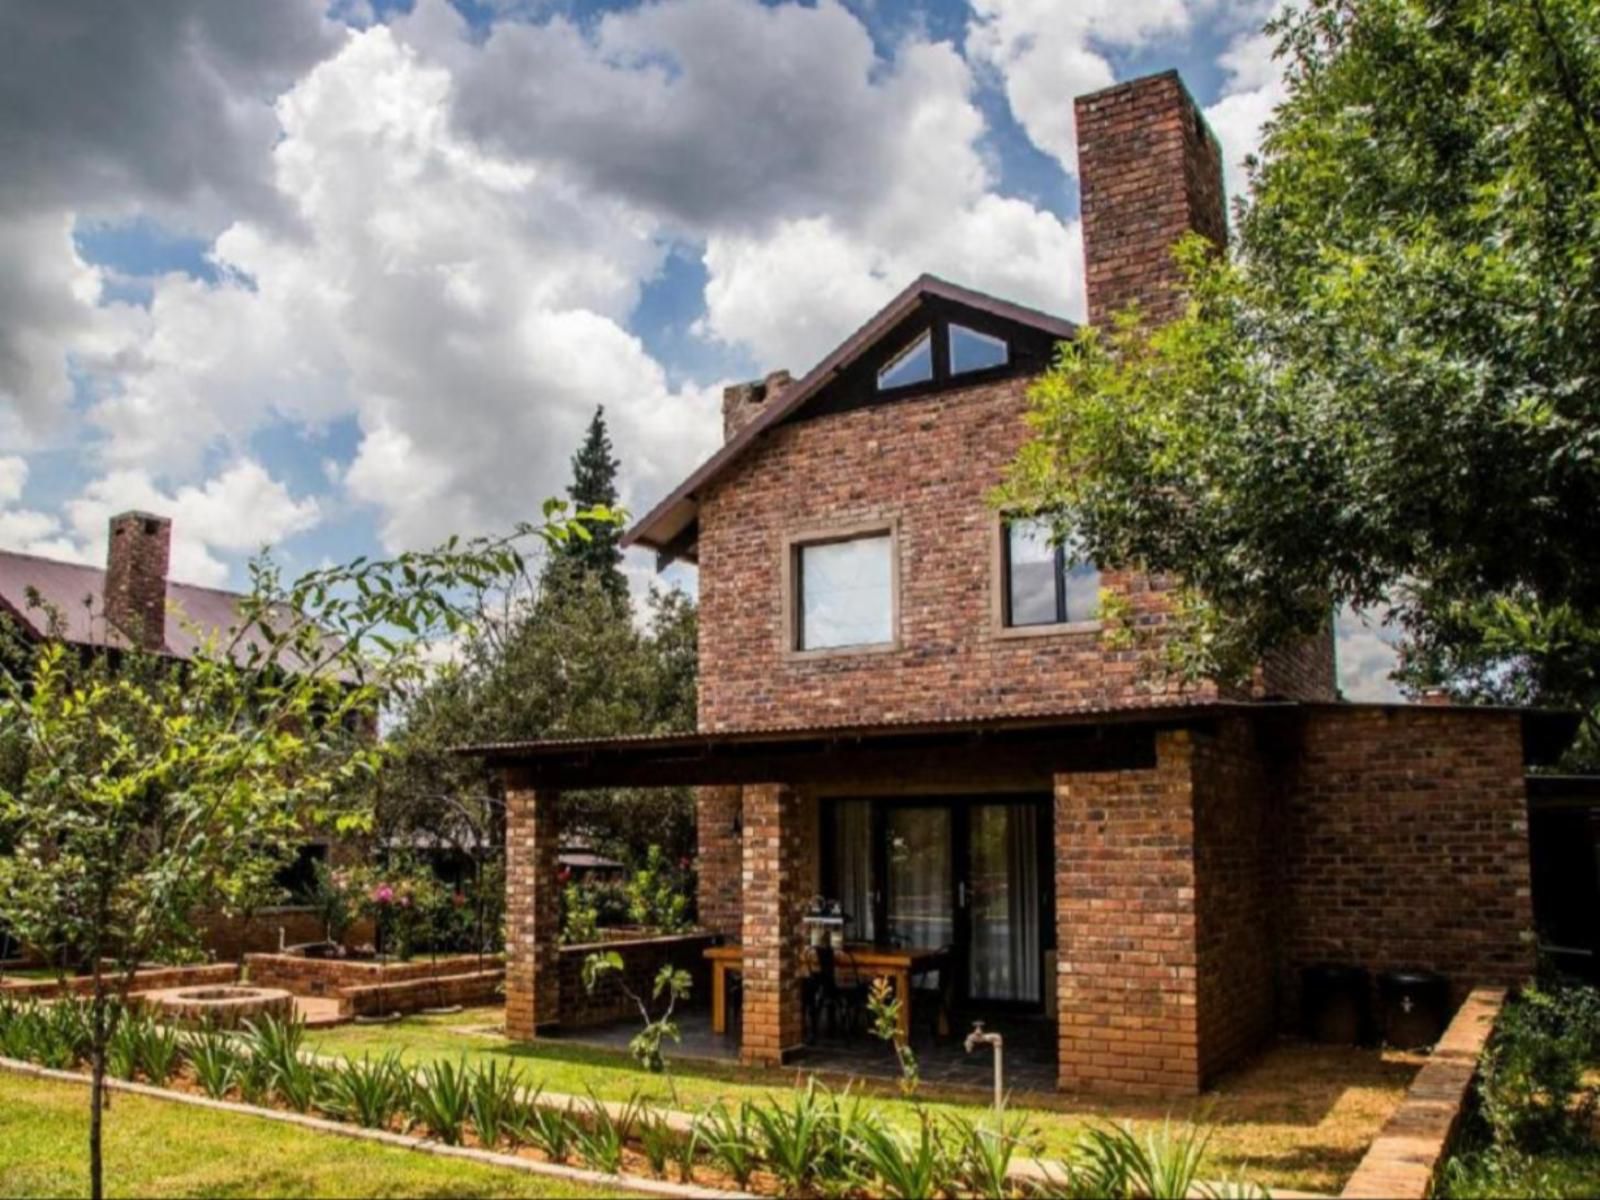 Tarry Stone Cottages Dullstroom Mpumalanga South Africa House, Building, Architecture